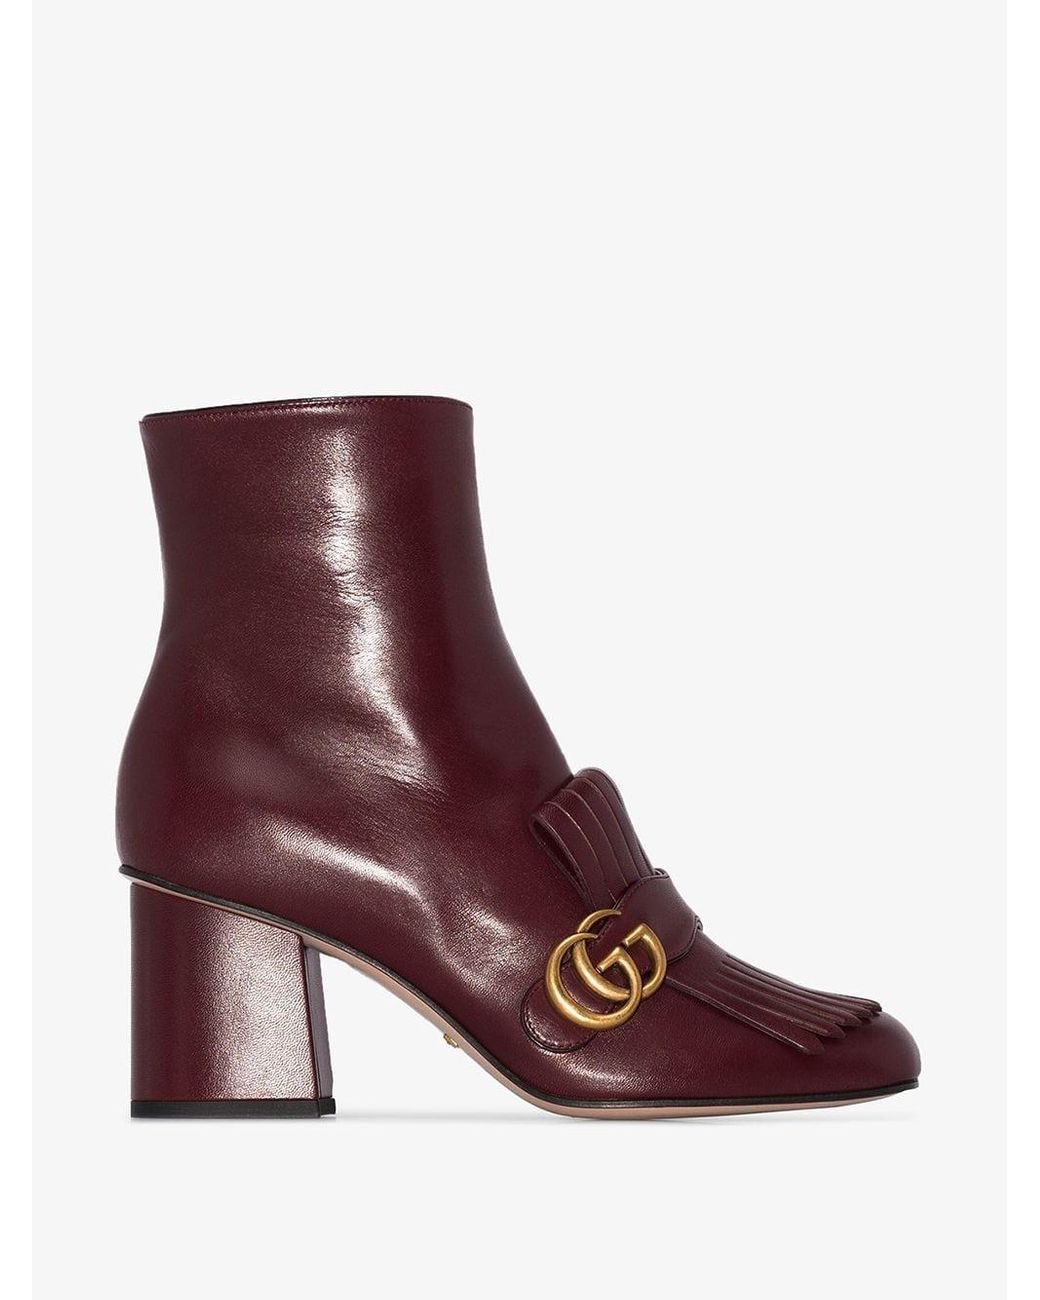 Gucci Burgundy Marmont 75 Fringed Leather Ankle Boots | Lyst